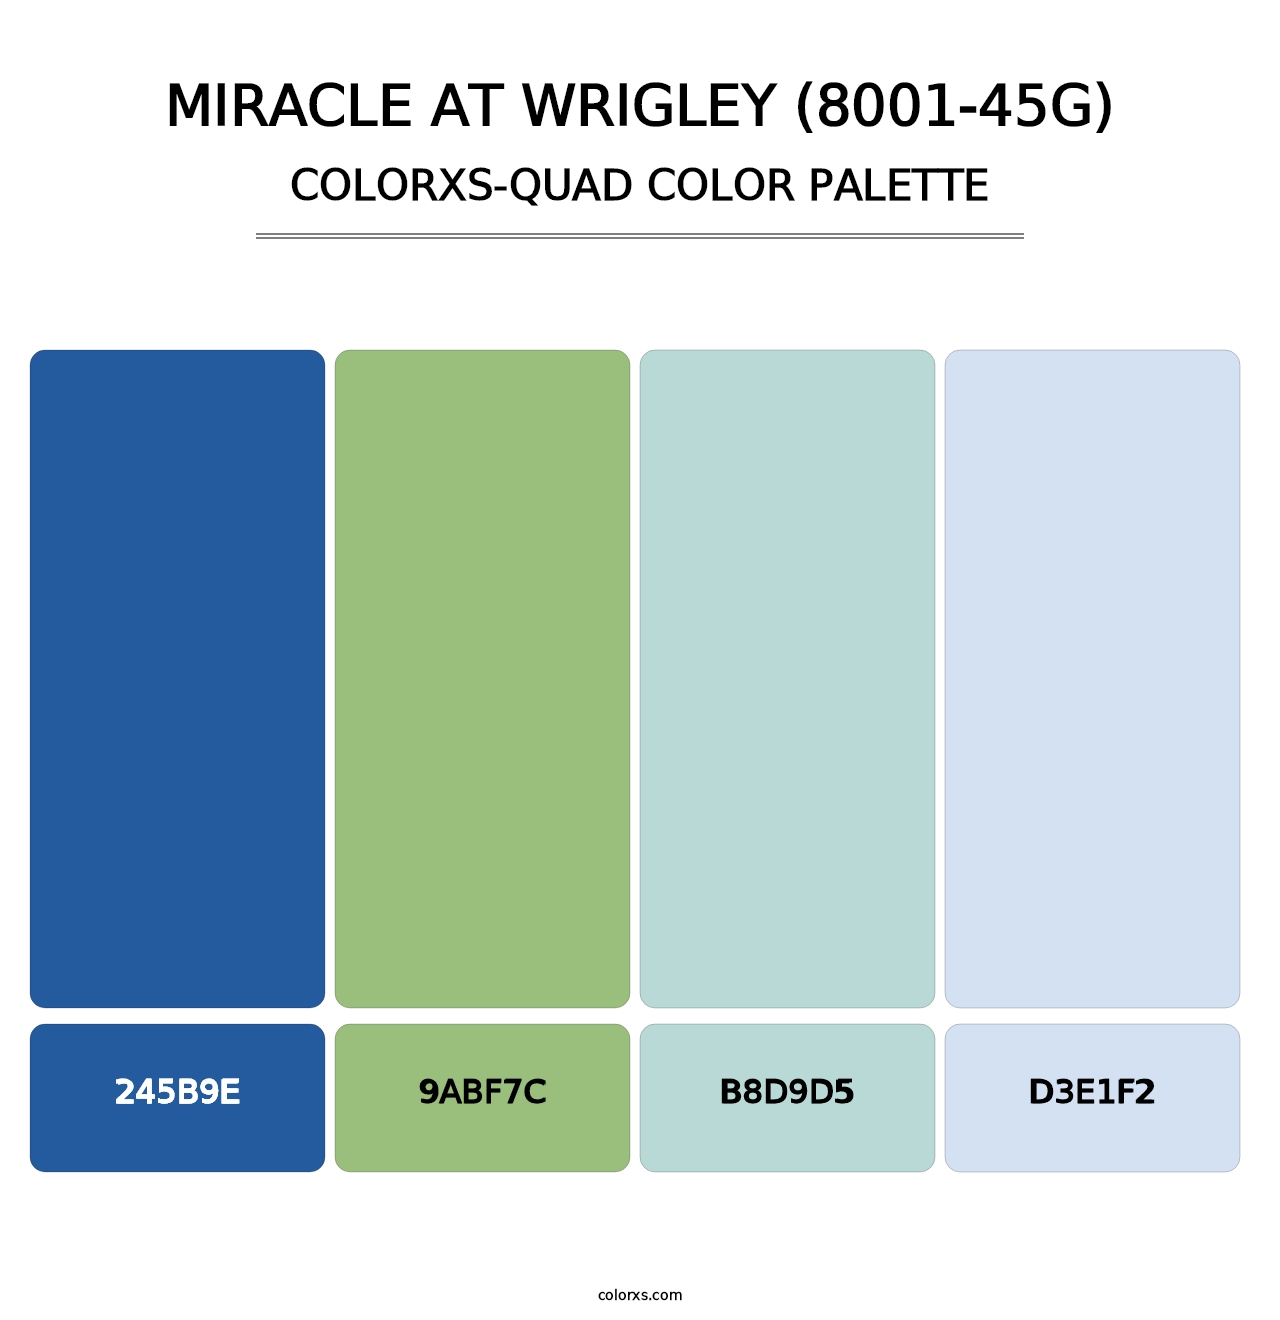 Miracle at Wrigley (8001-45G) - Colorxs Quad Palette